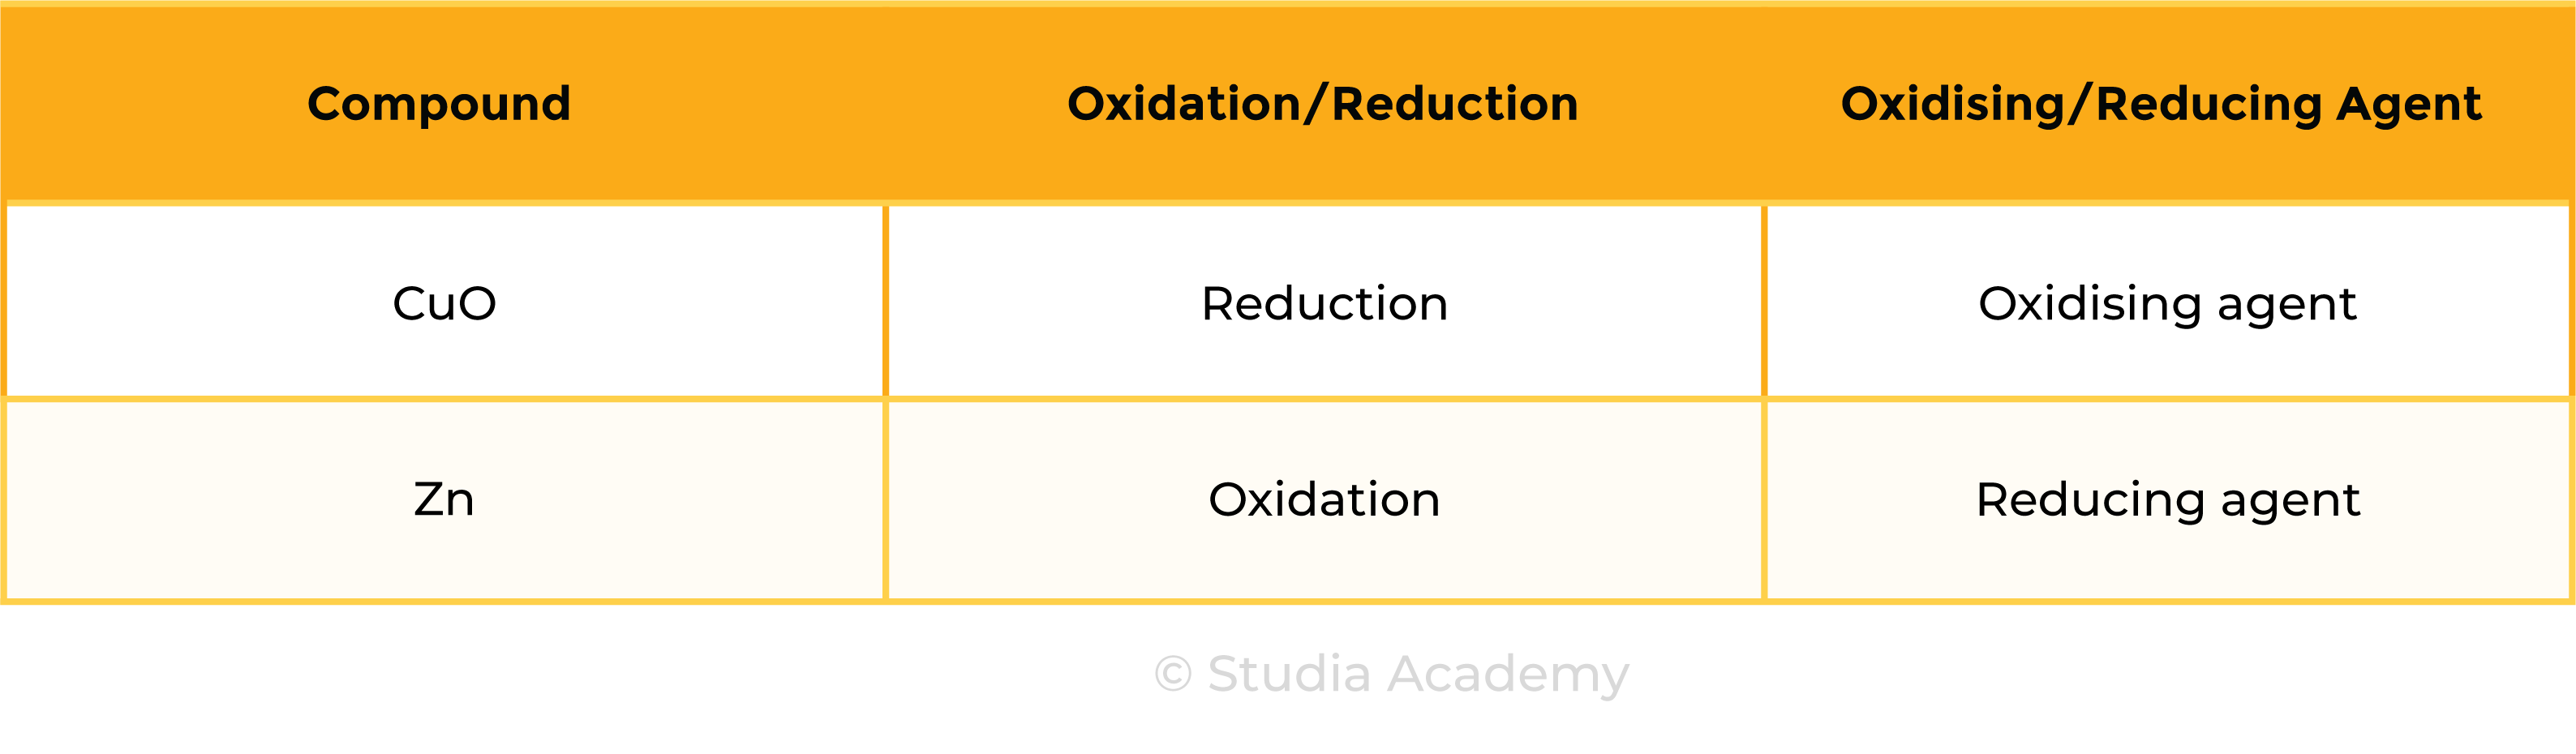 edexcel_igcse_chemistry_topic 13 tables_reactivity series_007_zinc and copper oxide redox reaction